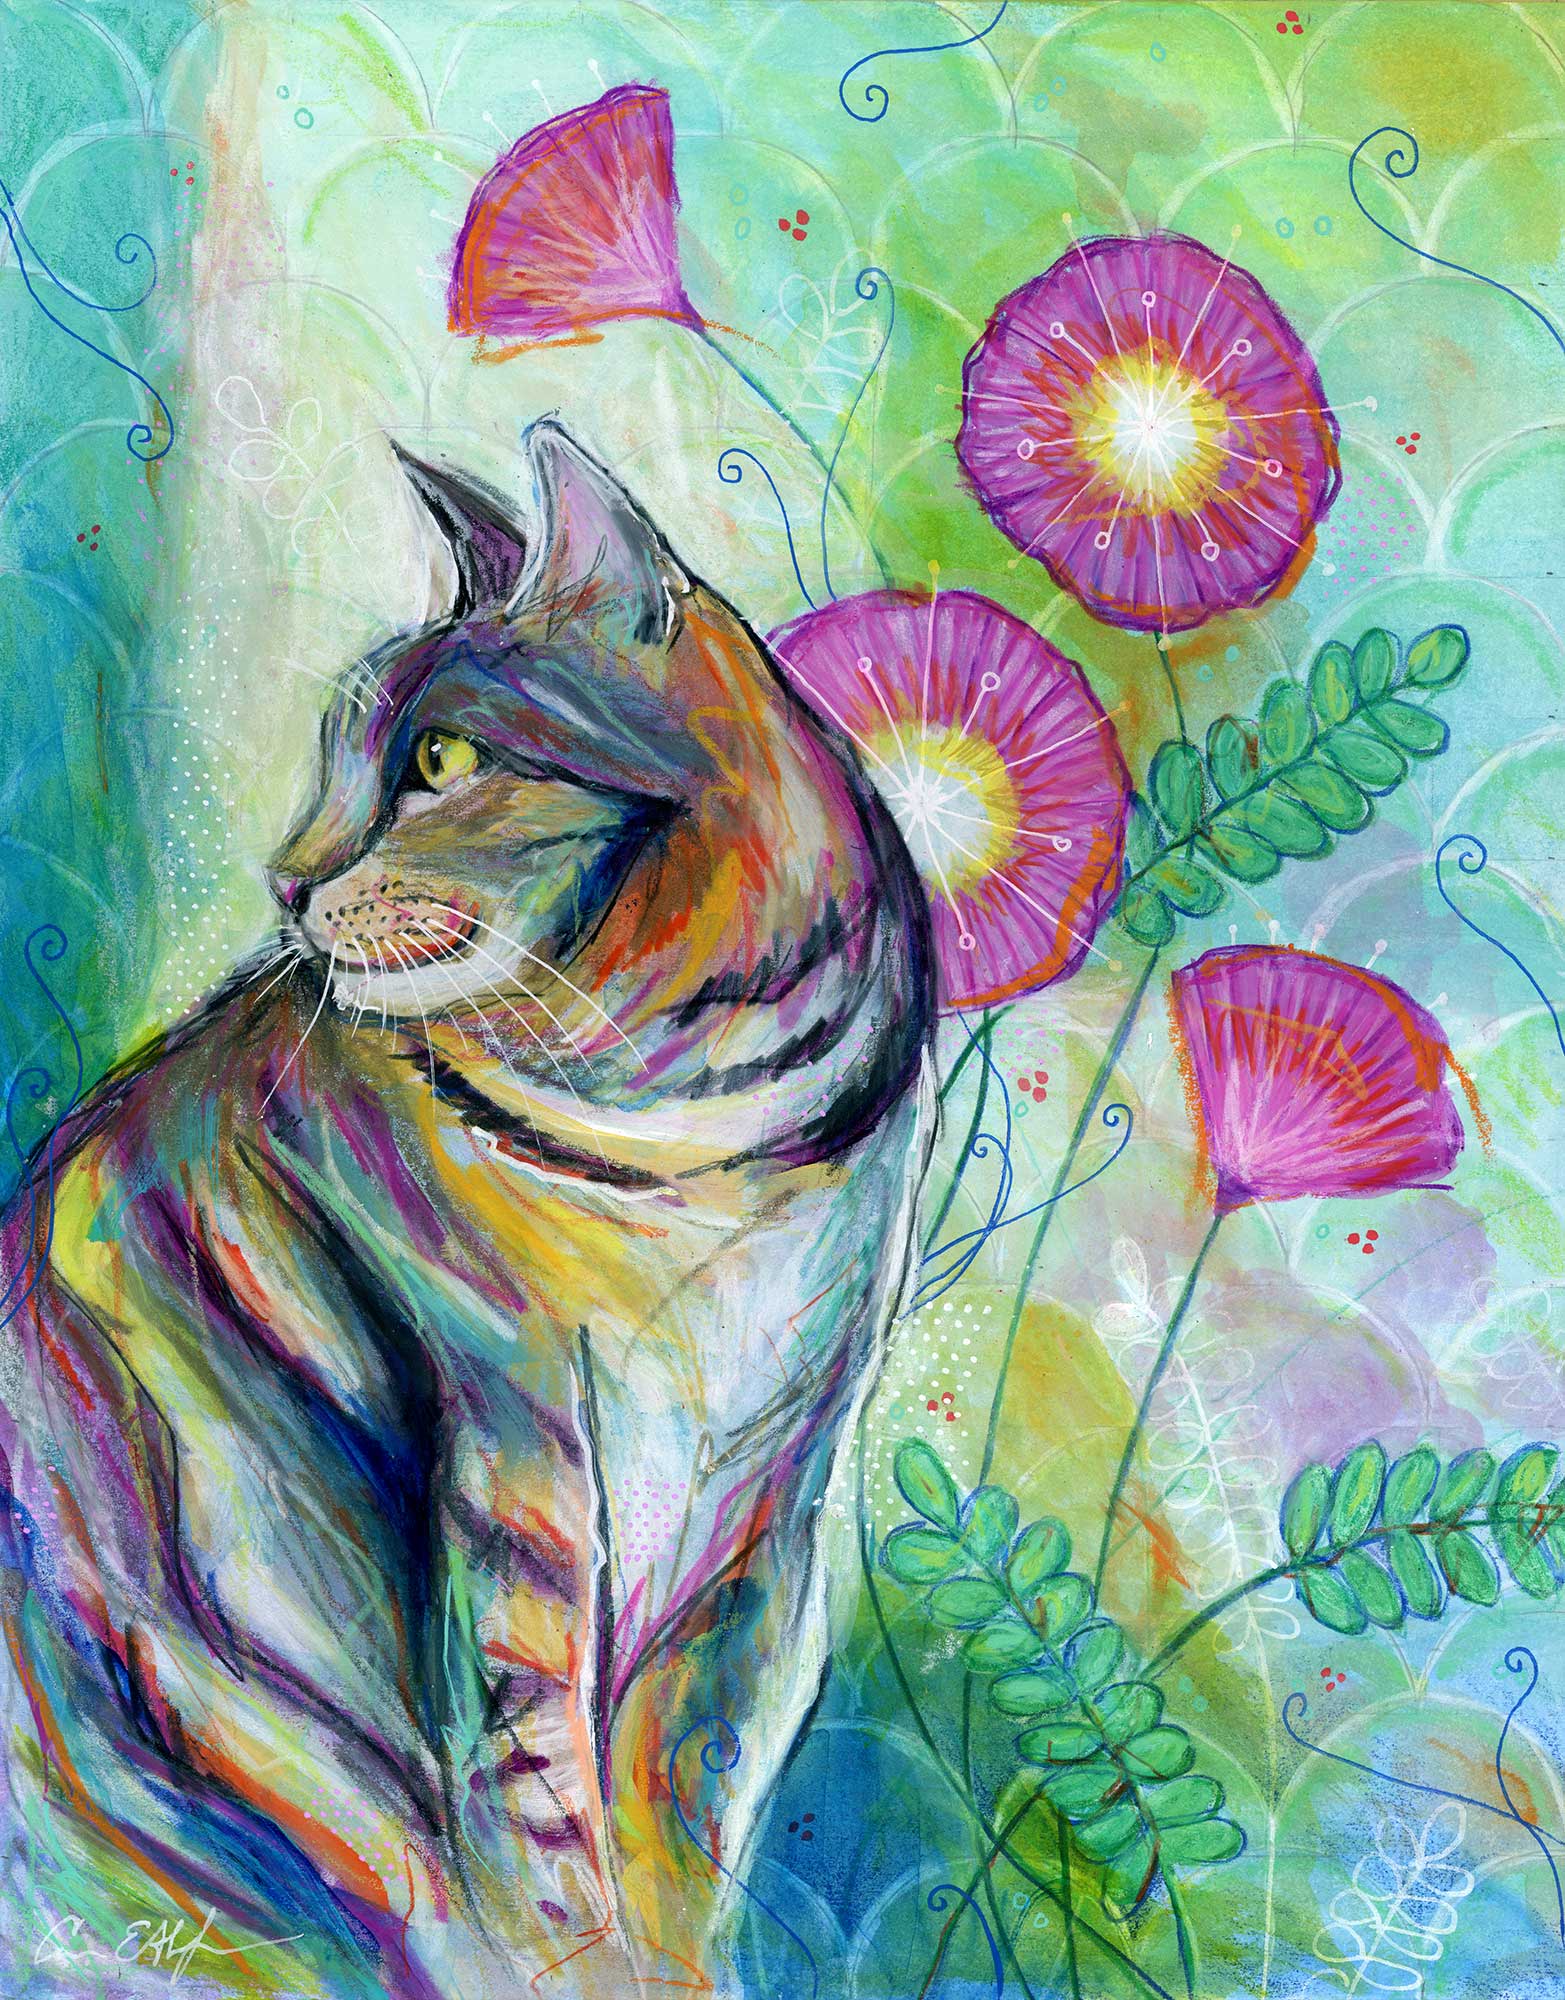 "Tabby Cat and Pink Flowers", 11" x 14", mixed media